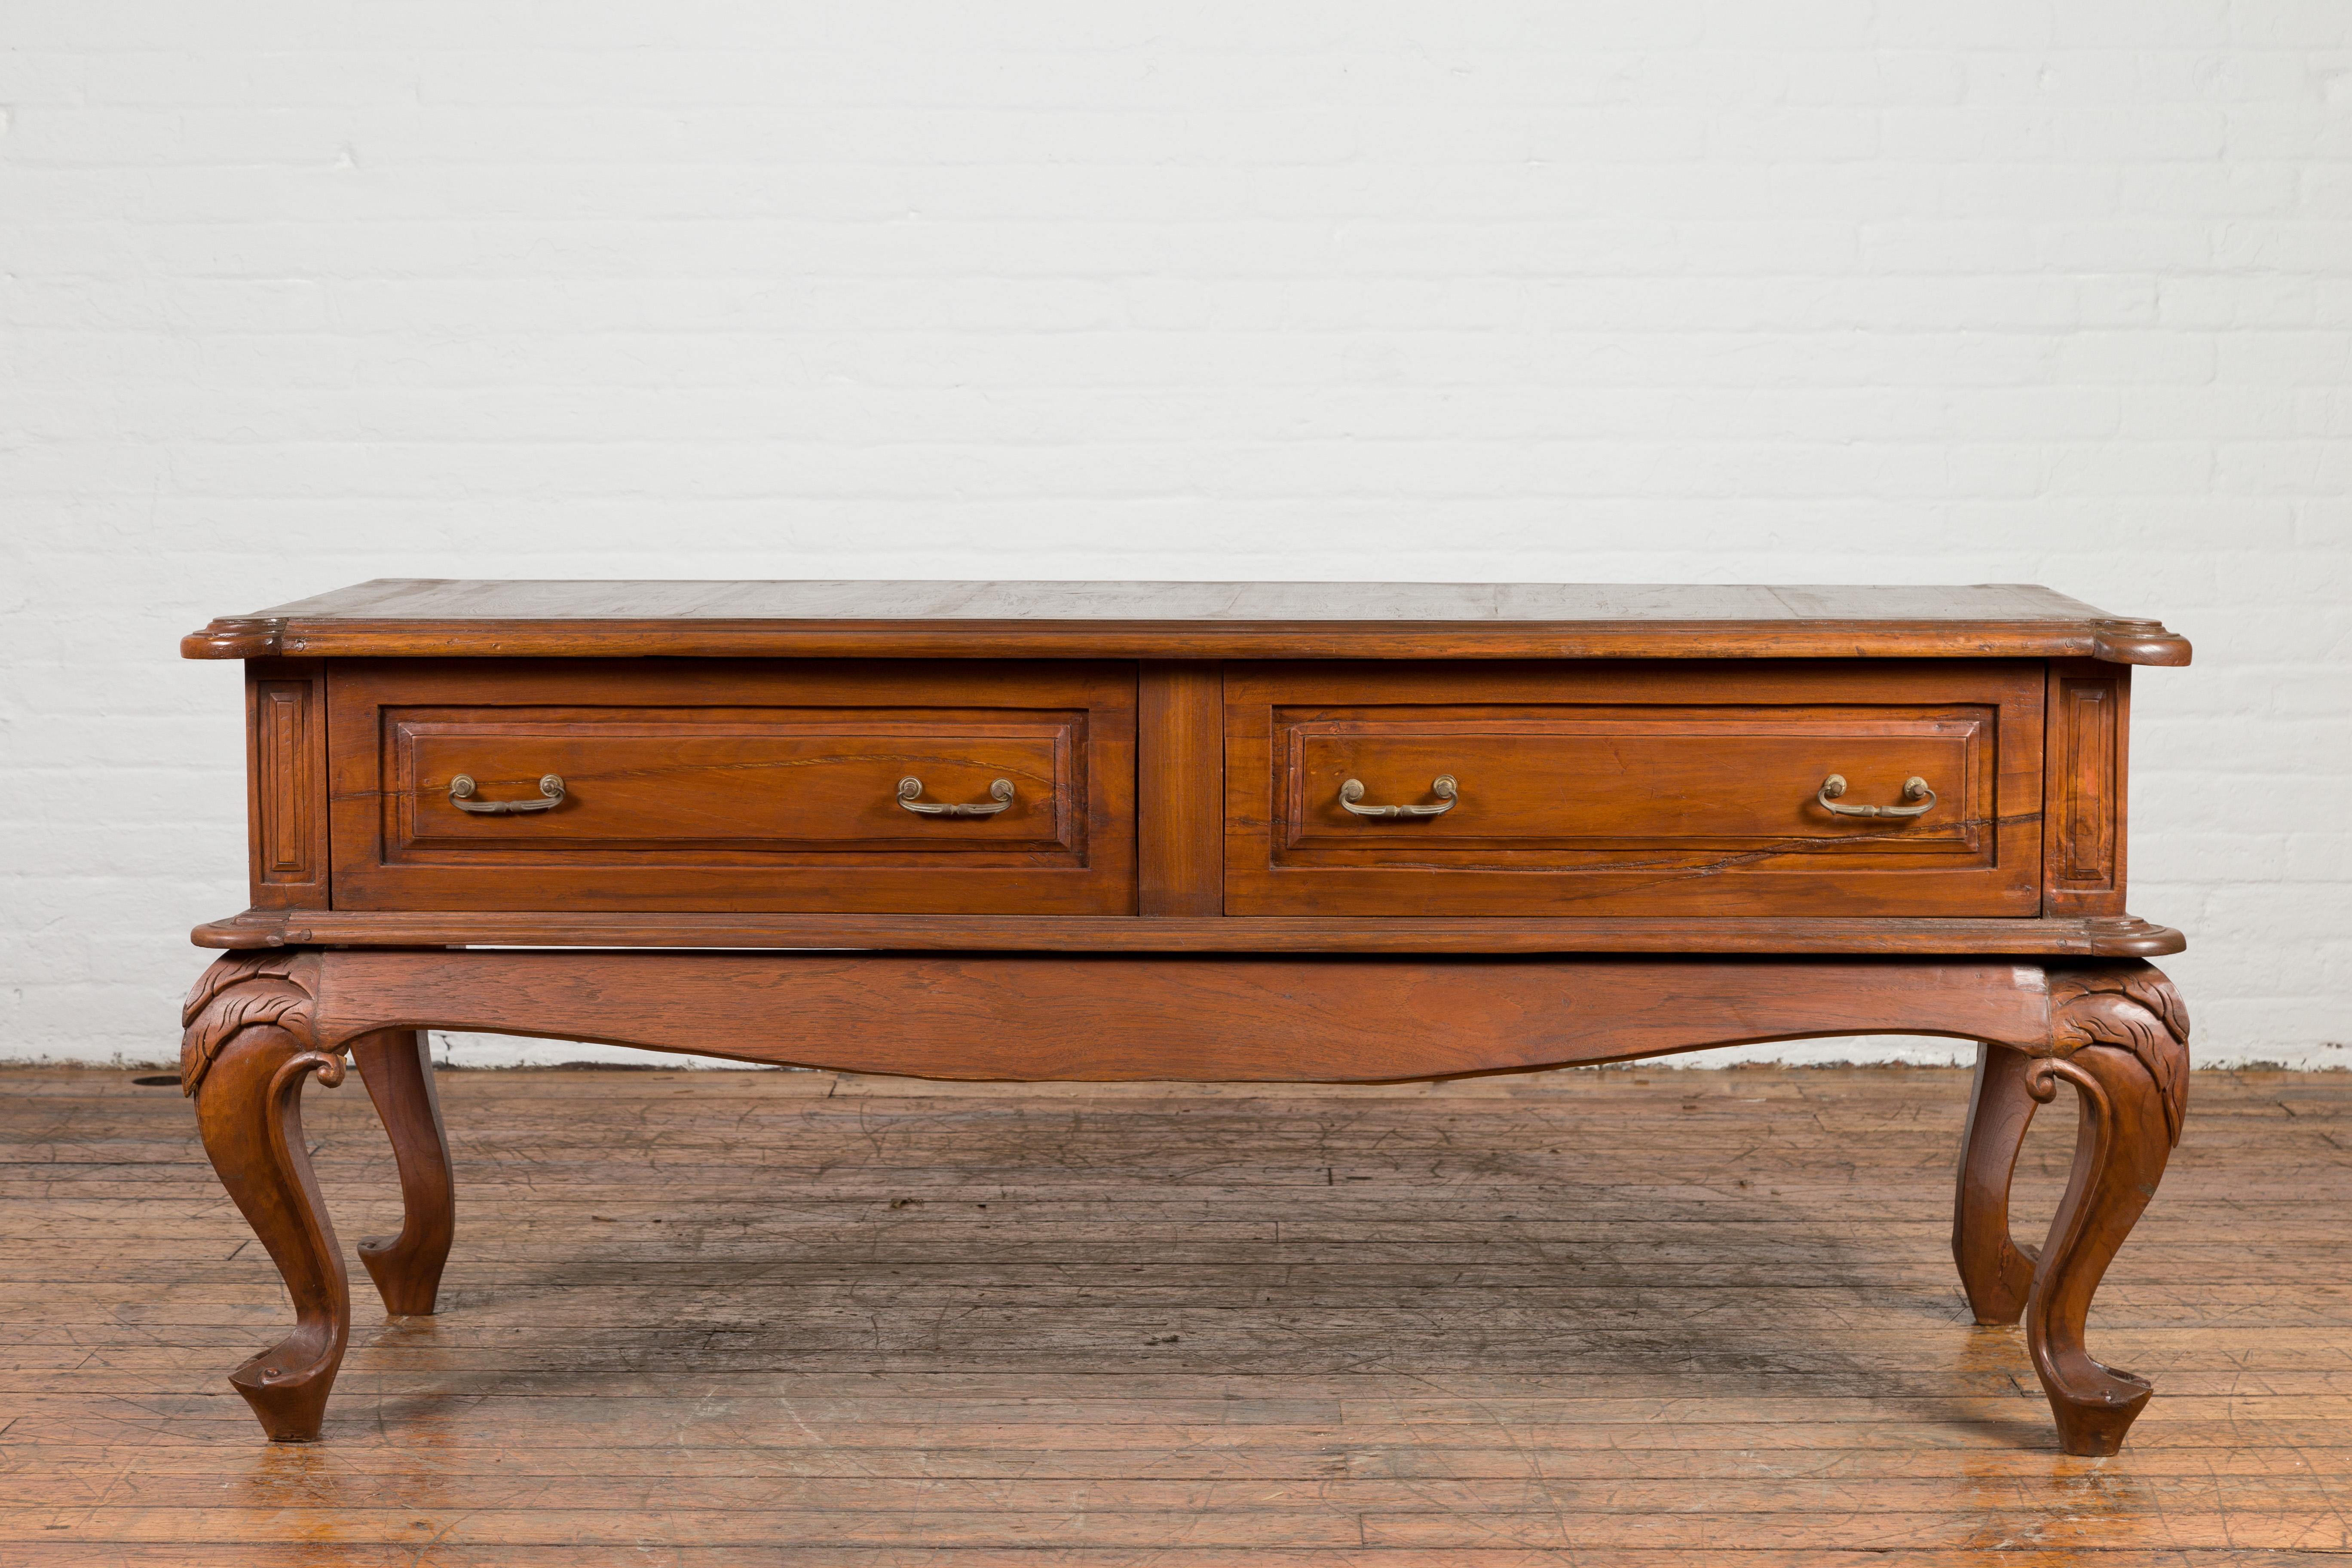 Carved Dutch Colonial Early 20th Century Low Table with Two Drawers and Cabriole Legs For Sale